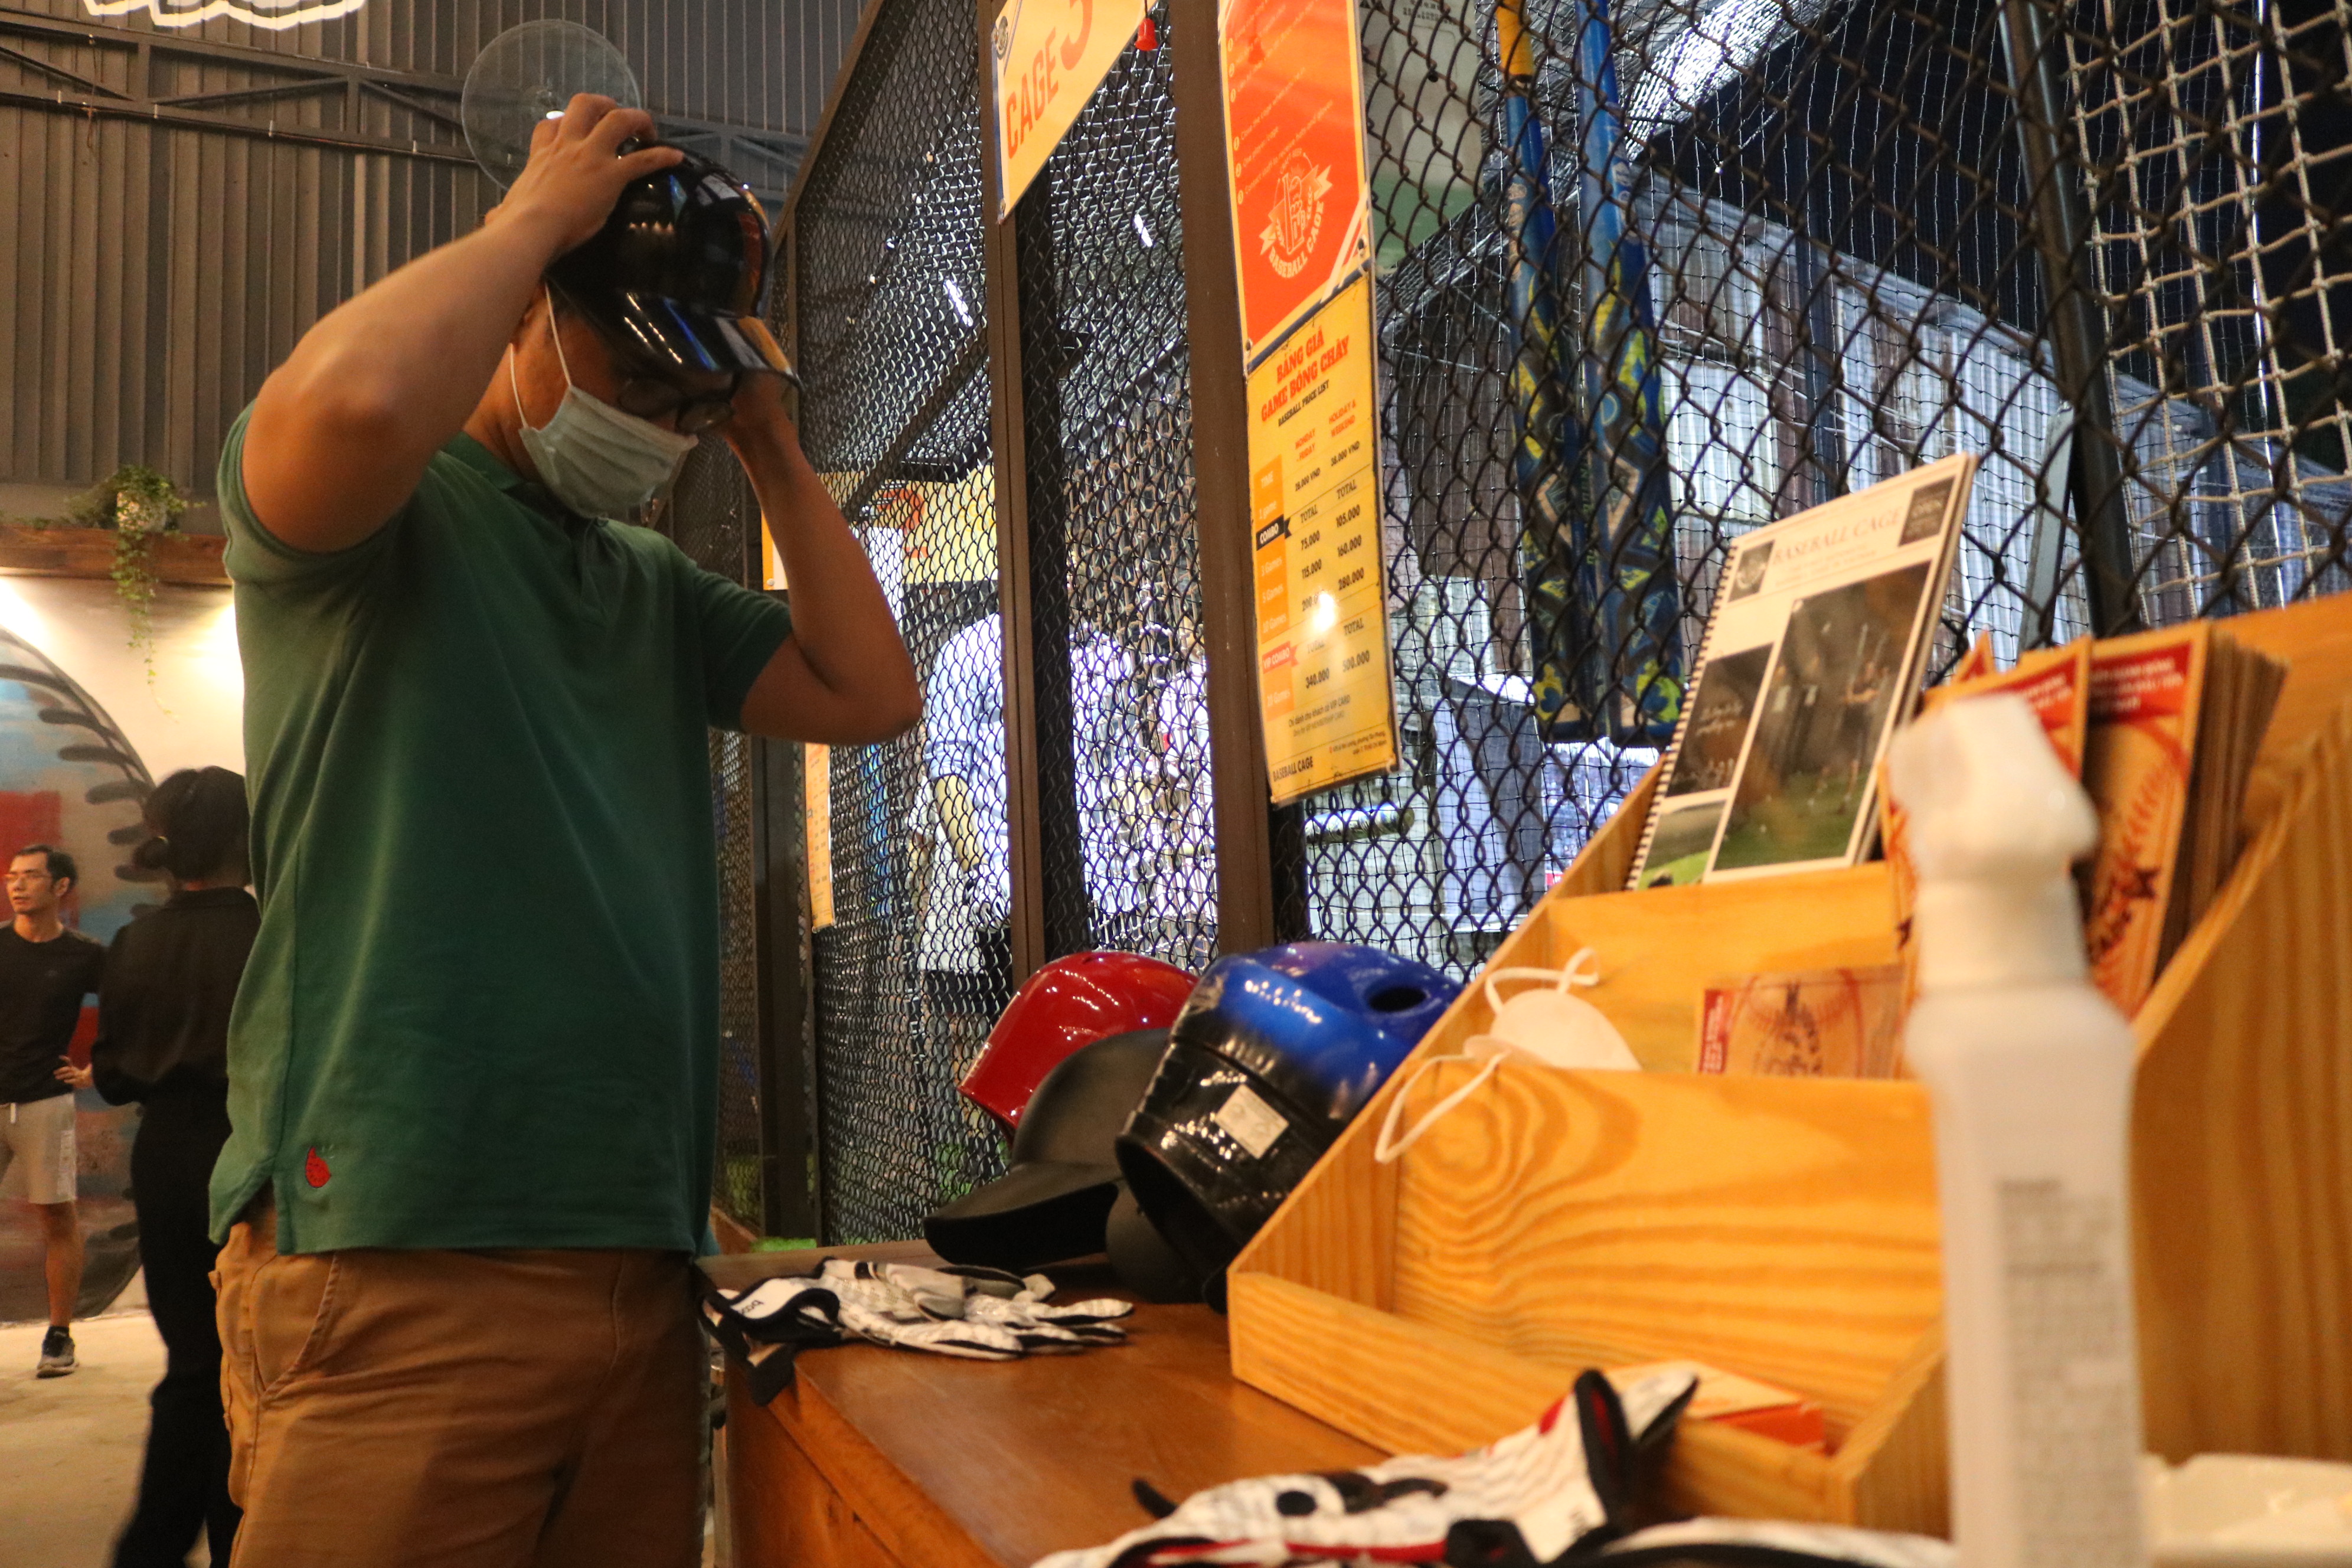 A player puts a helmet on before entering the batting cages at Baseball Cage in Ho Chi Minh City’s District 7 on November 17, 2021. Photo: Hoang An / Tuoi Tre News